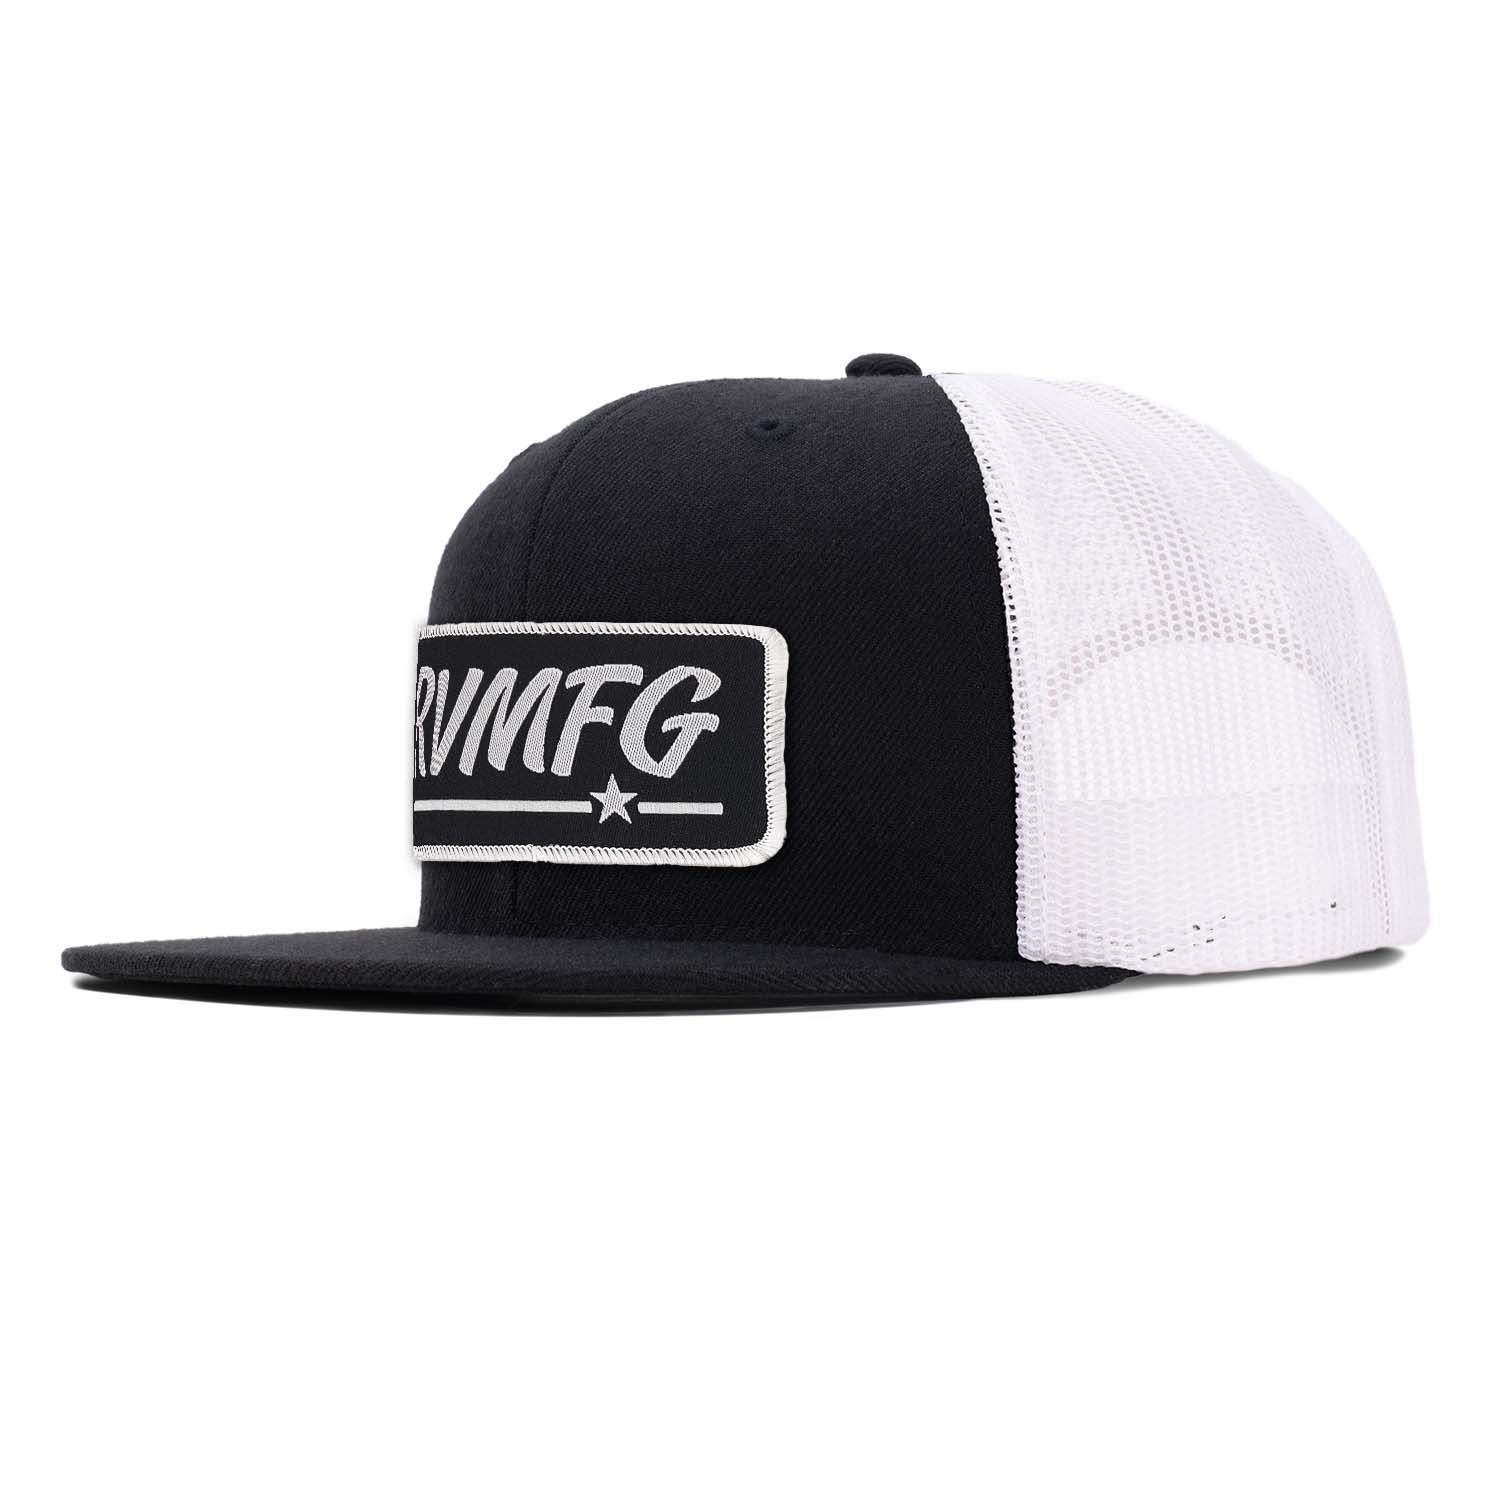 Revolution Mfg flat bill trucker hat in black with white mesh with a woven black RVMFG patch with white letters and white border